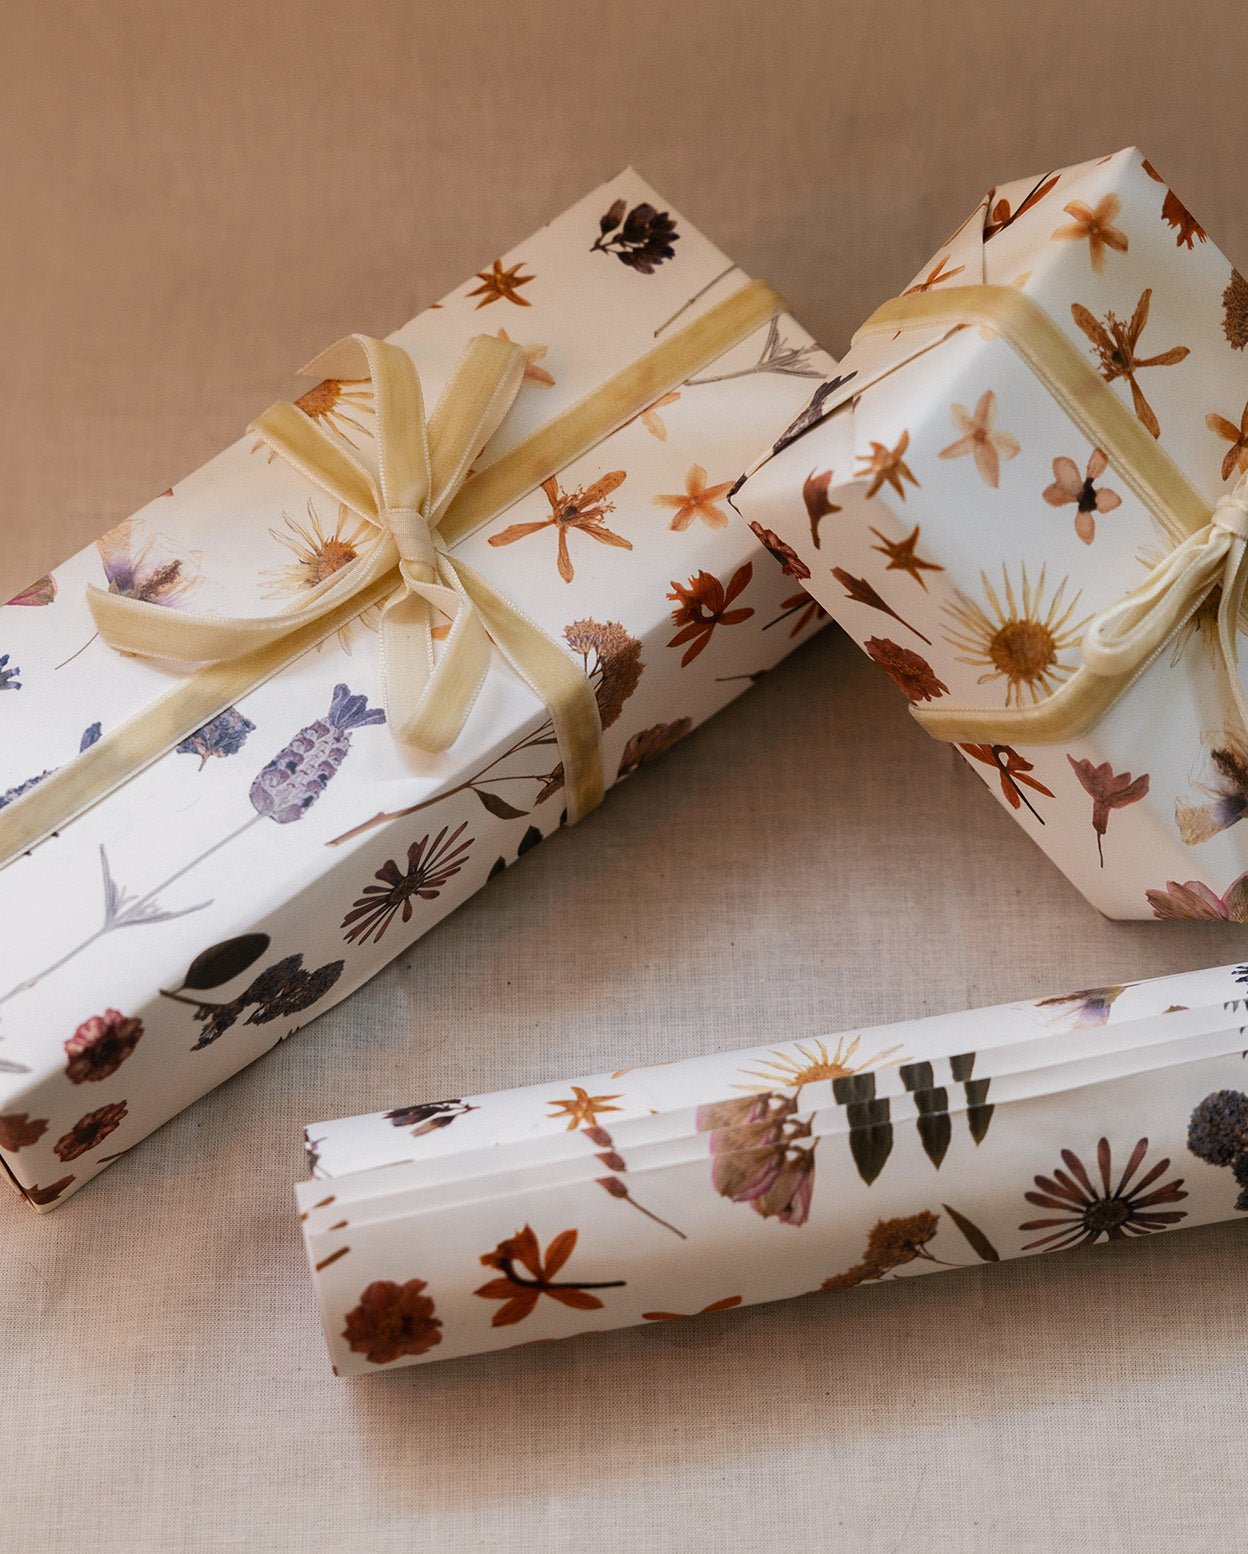 Pressed flowers gift wrap modeled in use as presents with white ribbon and rolled up against a beige background.